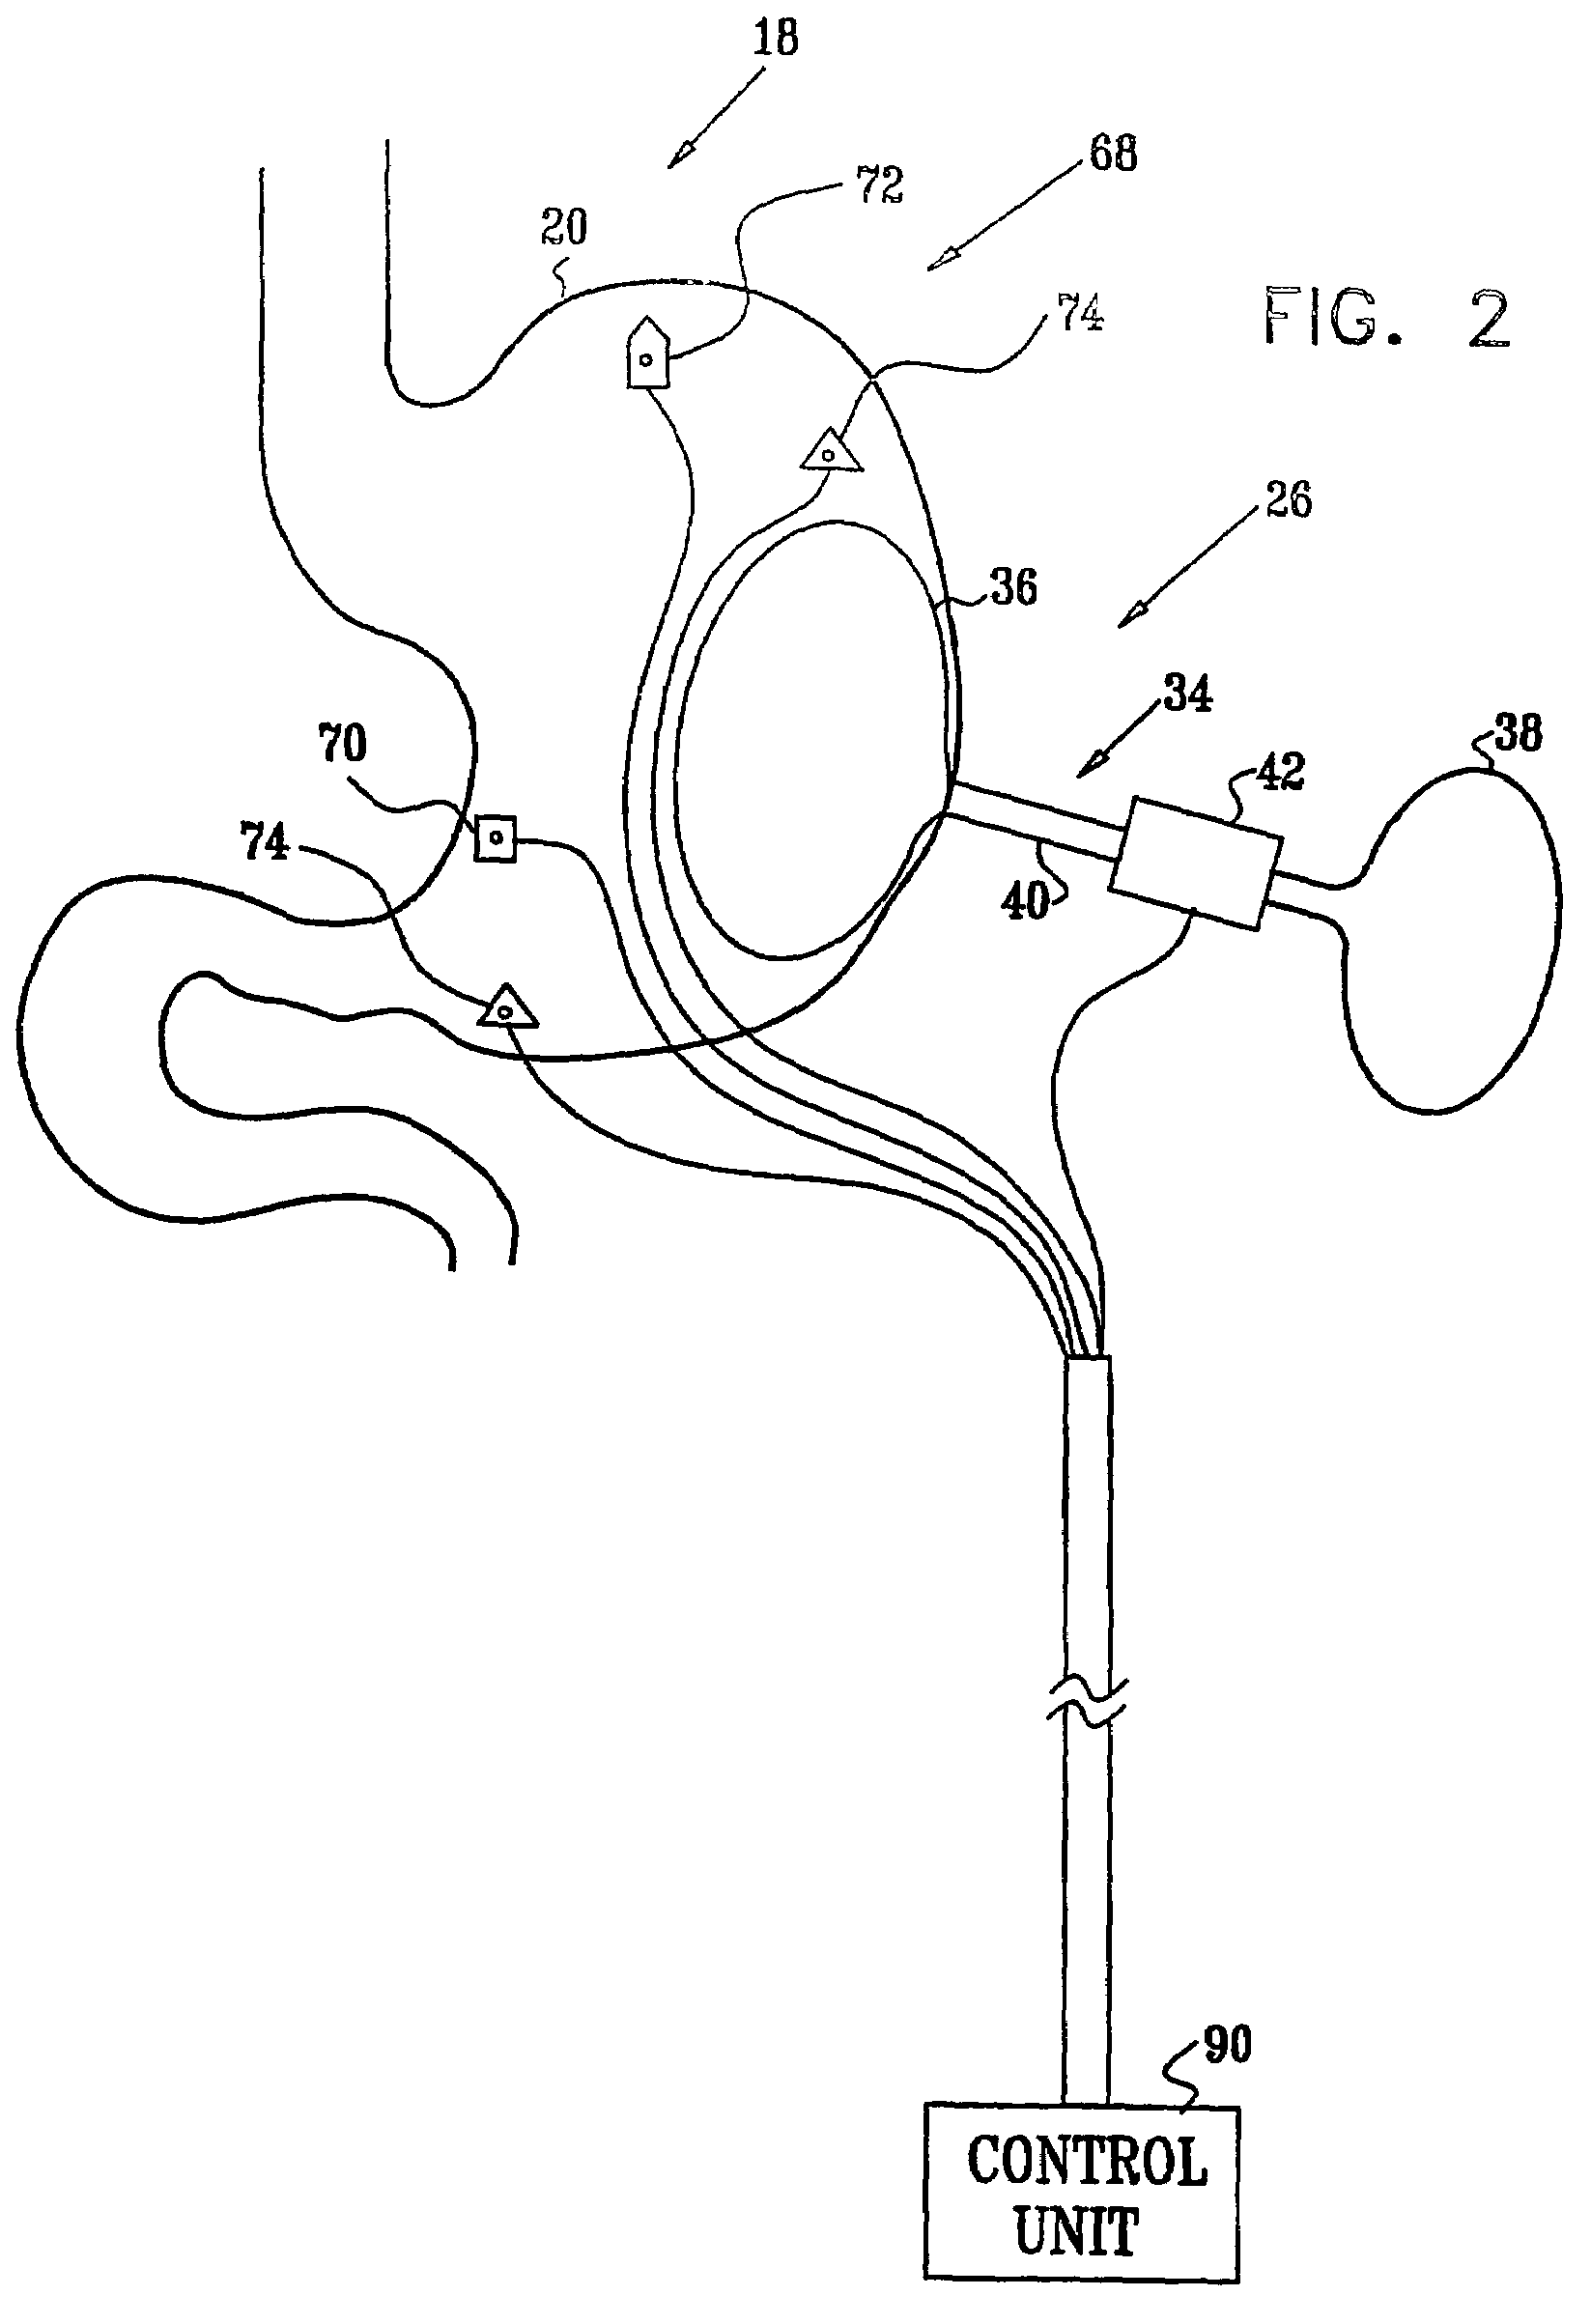 Gastrointestinal methods and apparatus for use in treating disorders